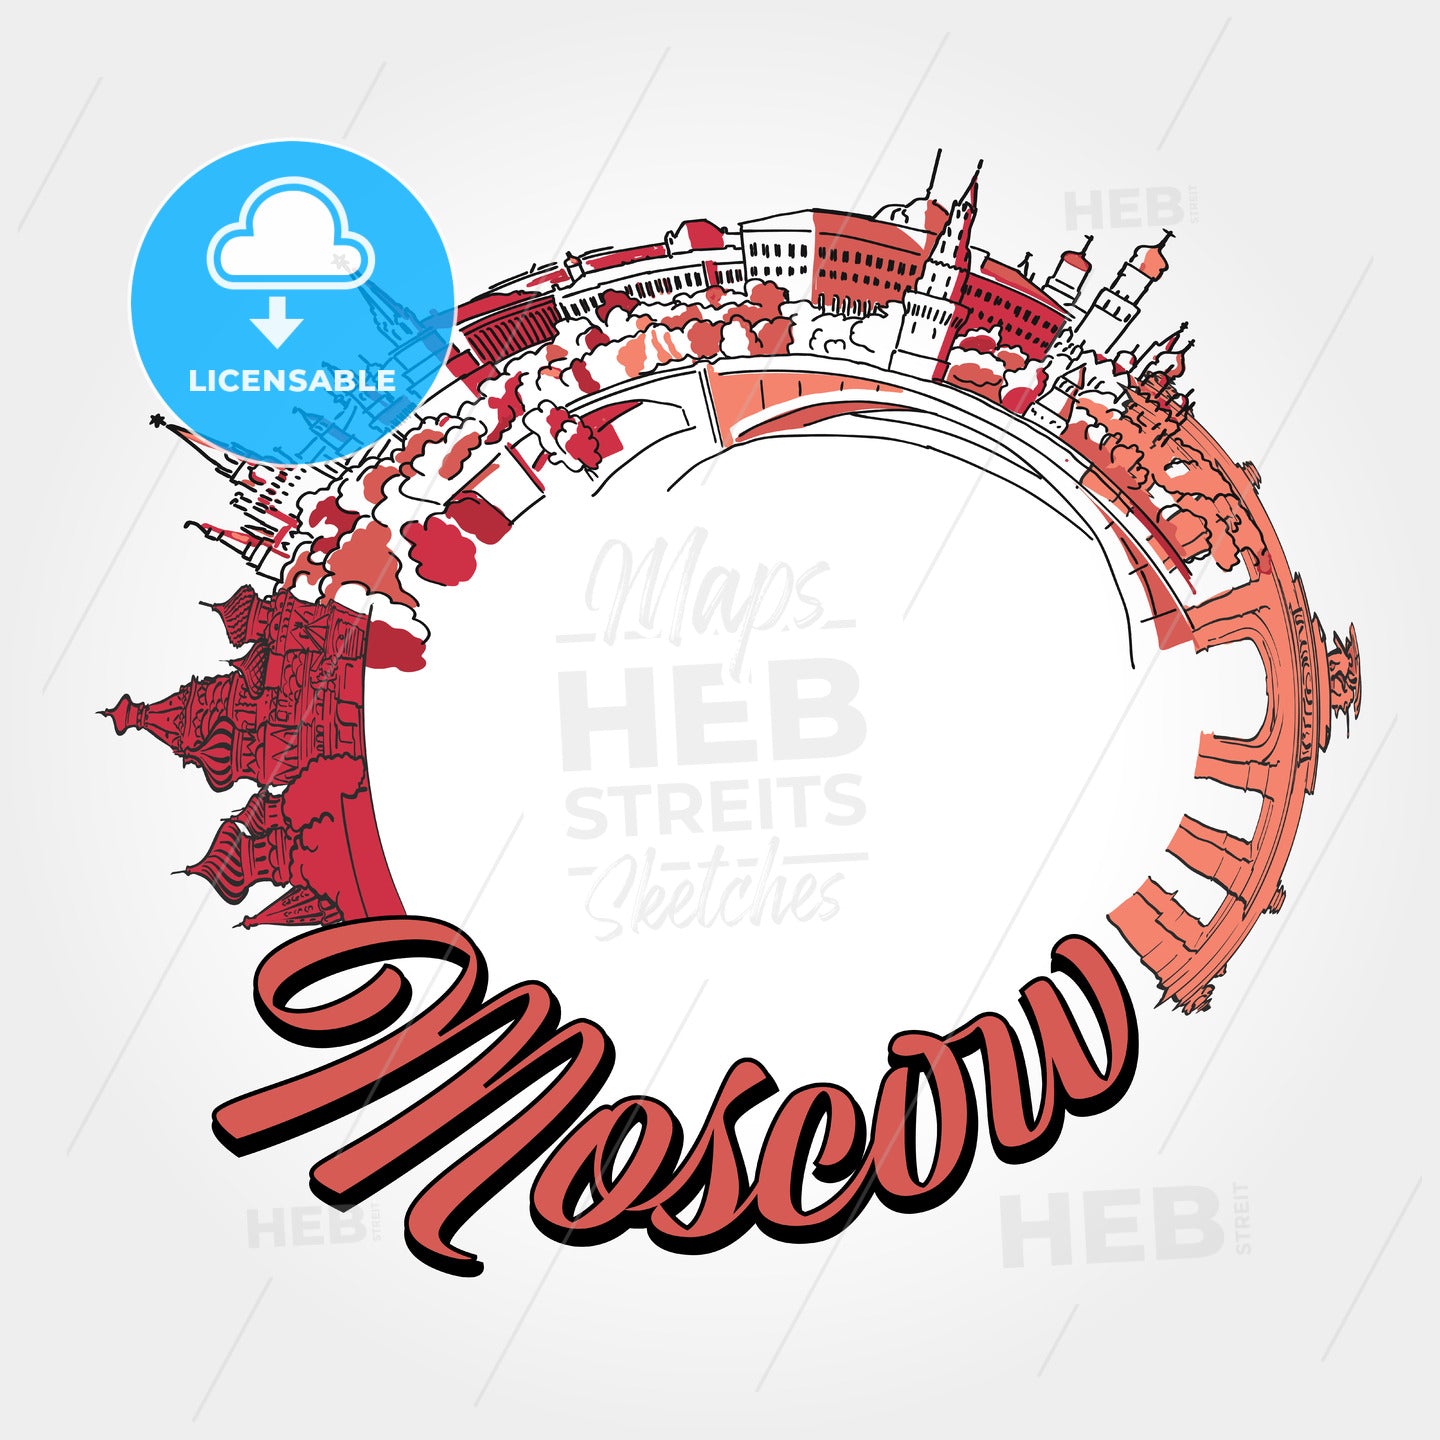 Moscow traveling potser artwork. – instant download